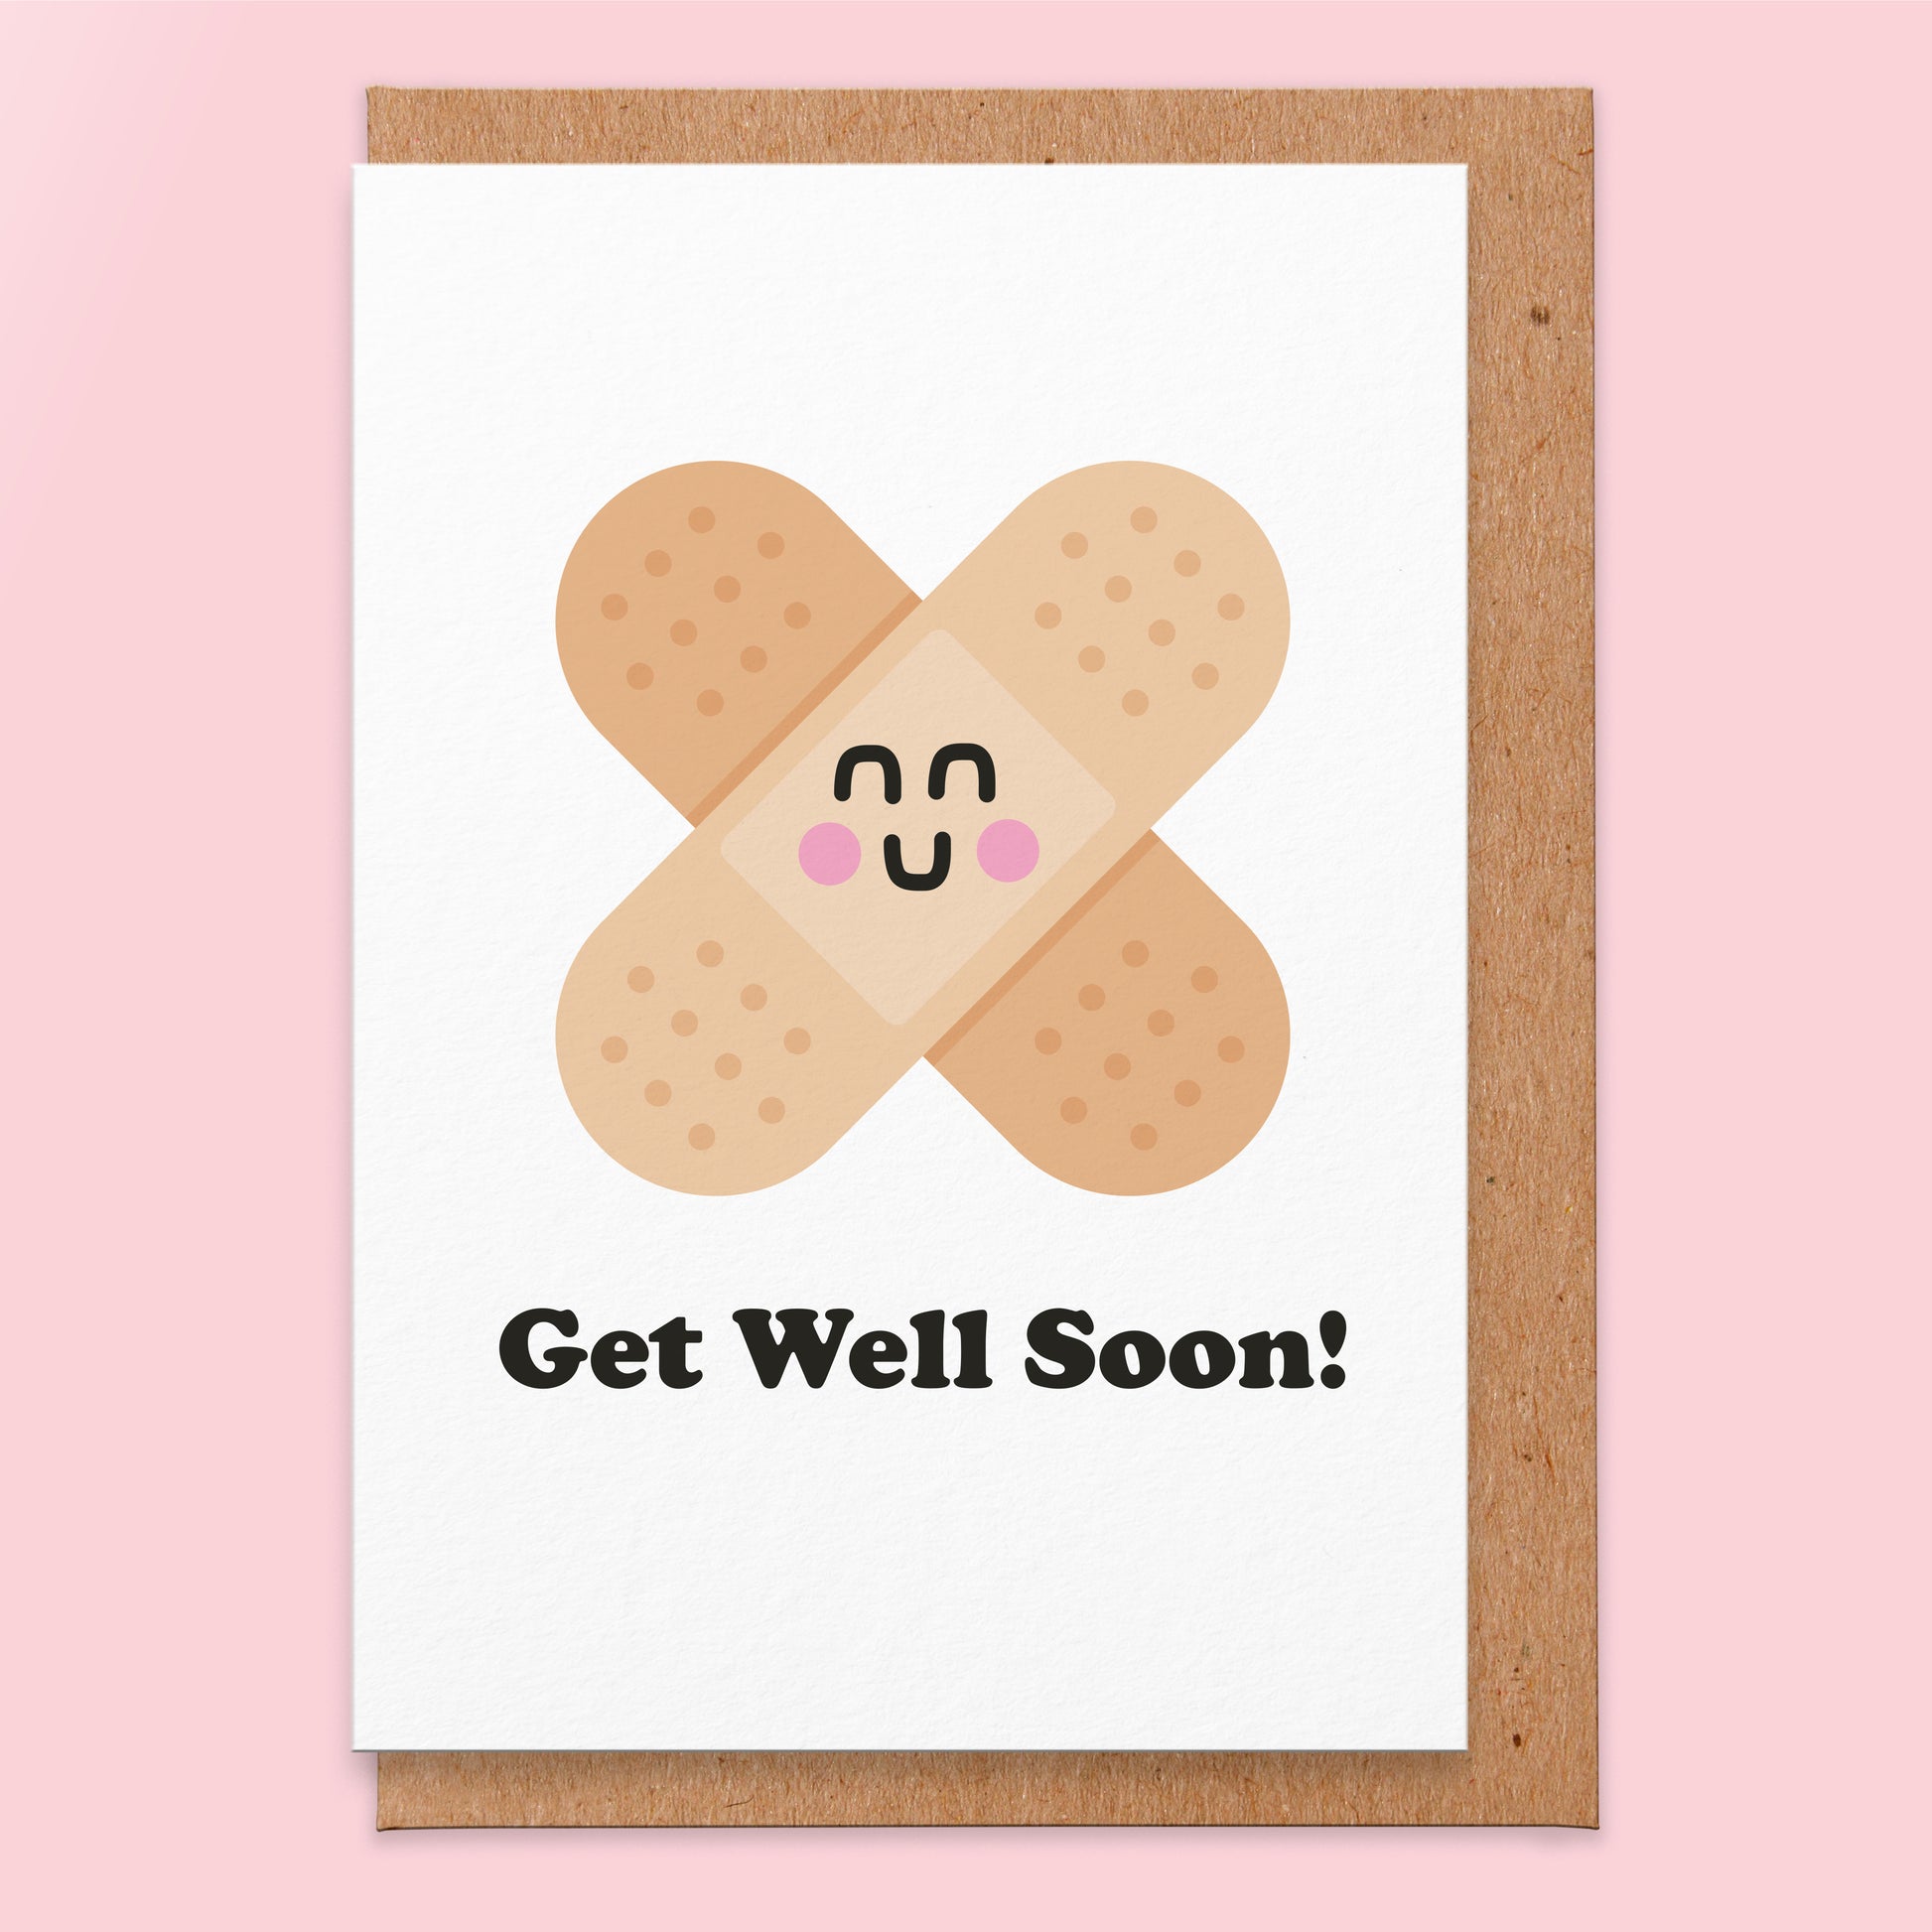 Get well soon card with an illustration of a plaster with a smiley face on .